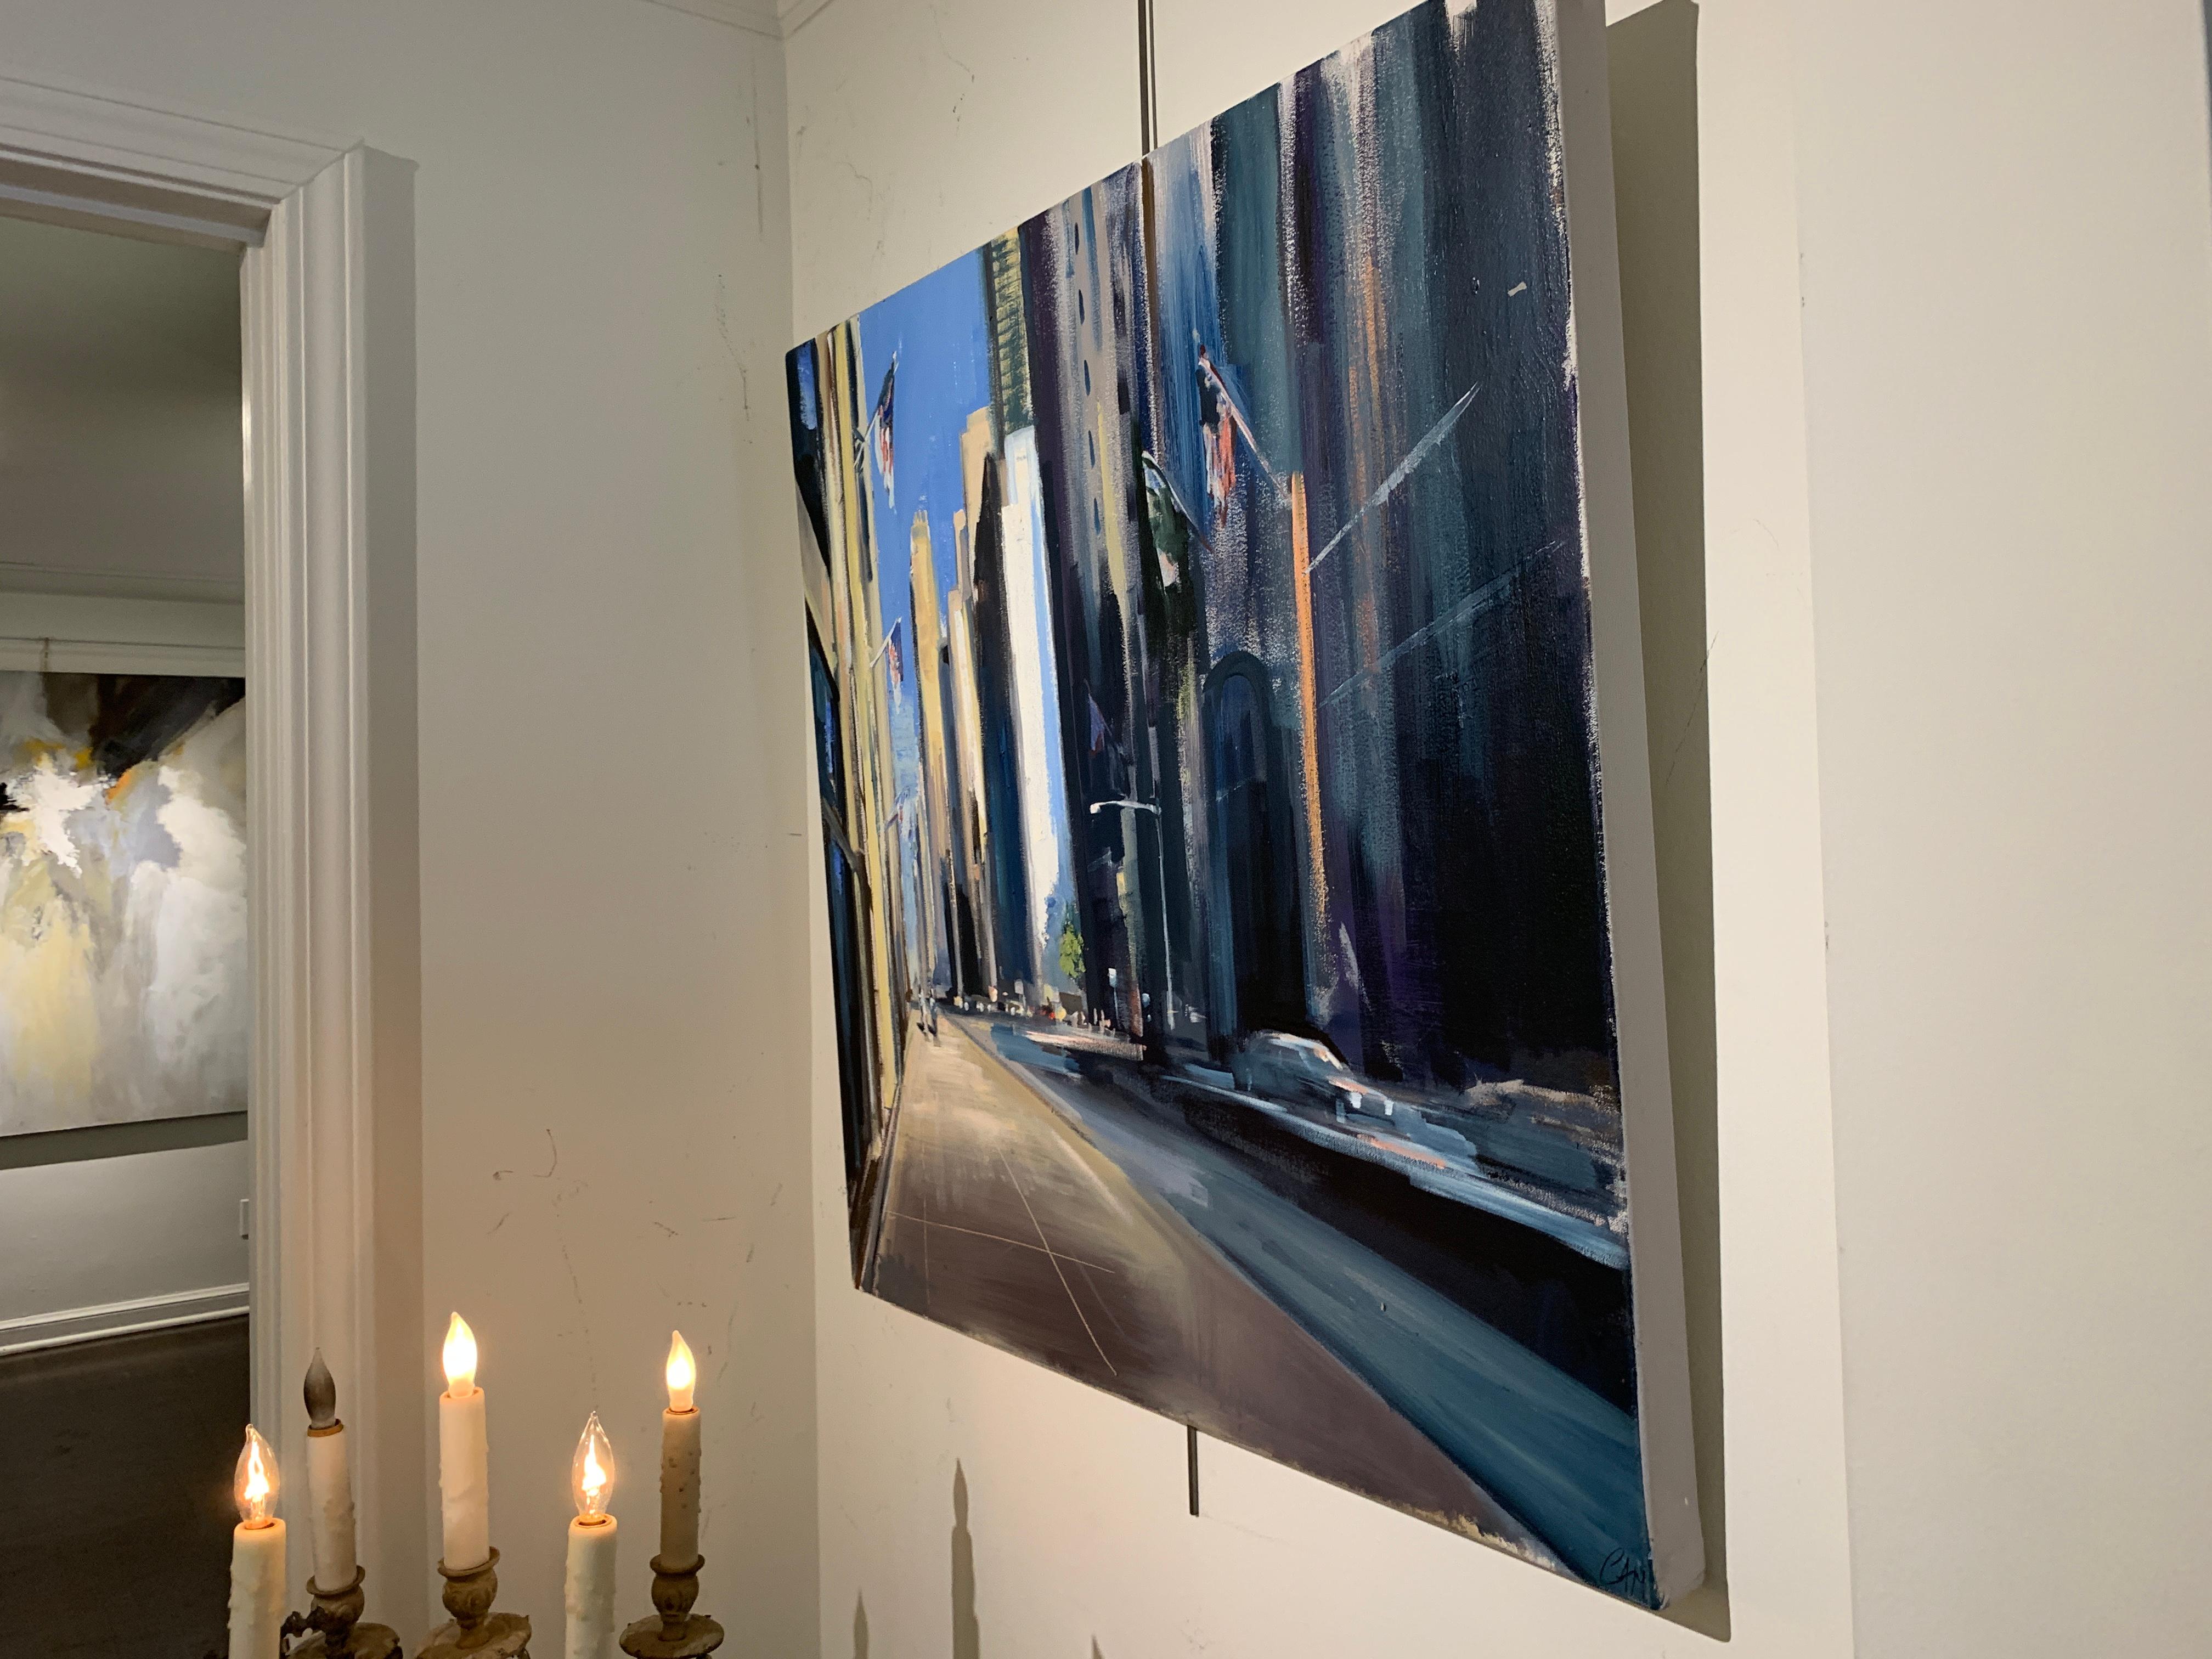 'City Avenue' is a representational oil on canvas cityscape painting created by American artist Craig Mooney in 2019. Featuring an exquisite palette mostly made of blue and cream tones, accented with touches of purple, the painting depicts a